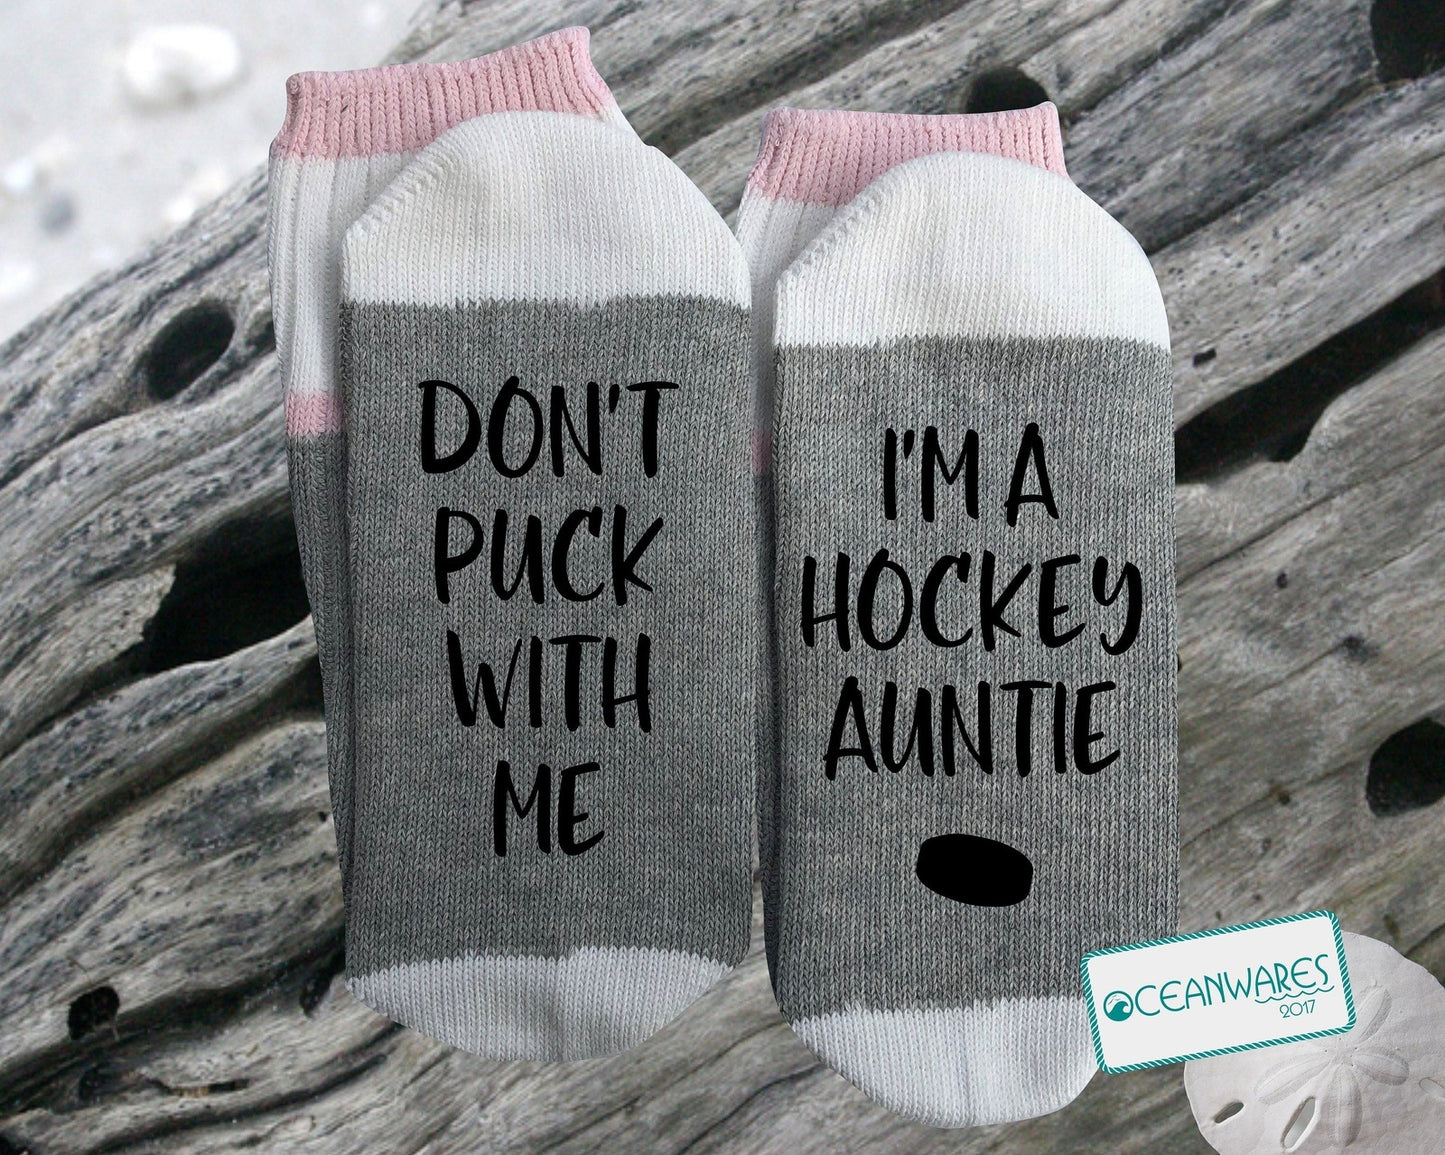 Don't Puck with Me, I'm a Hockey Auntie, SUPER SOFT NOVELTY WORD SOCKS.